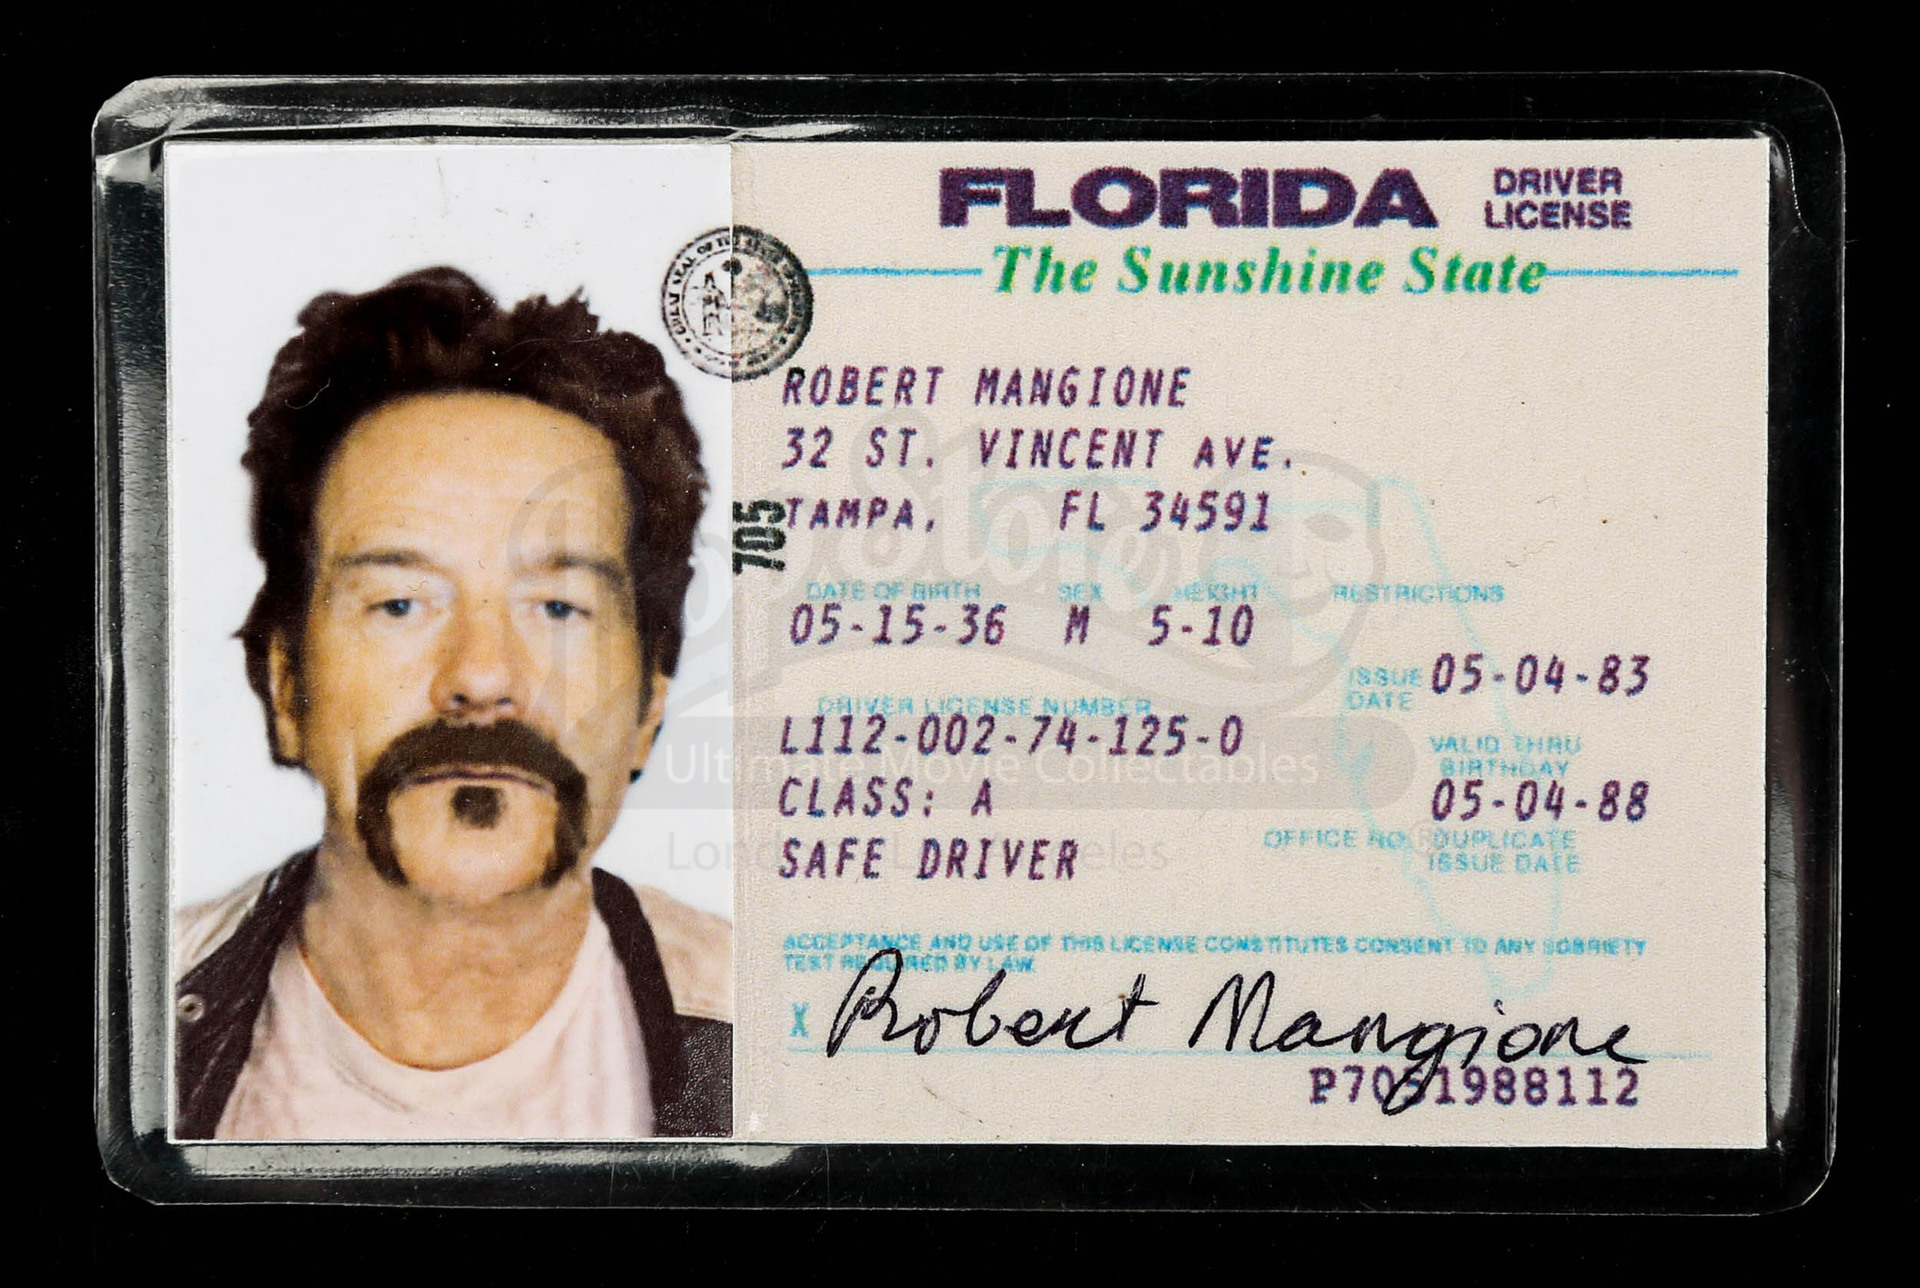 fl driver license issue date